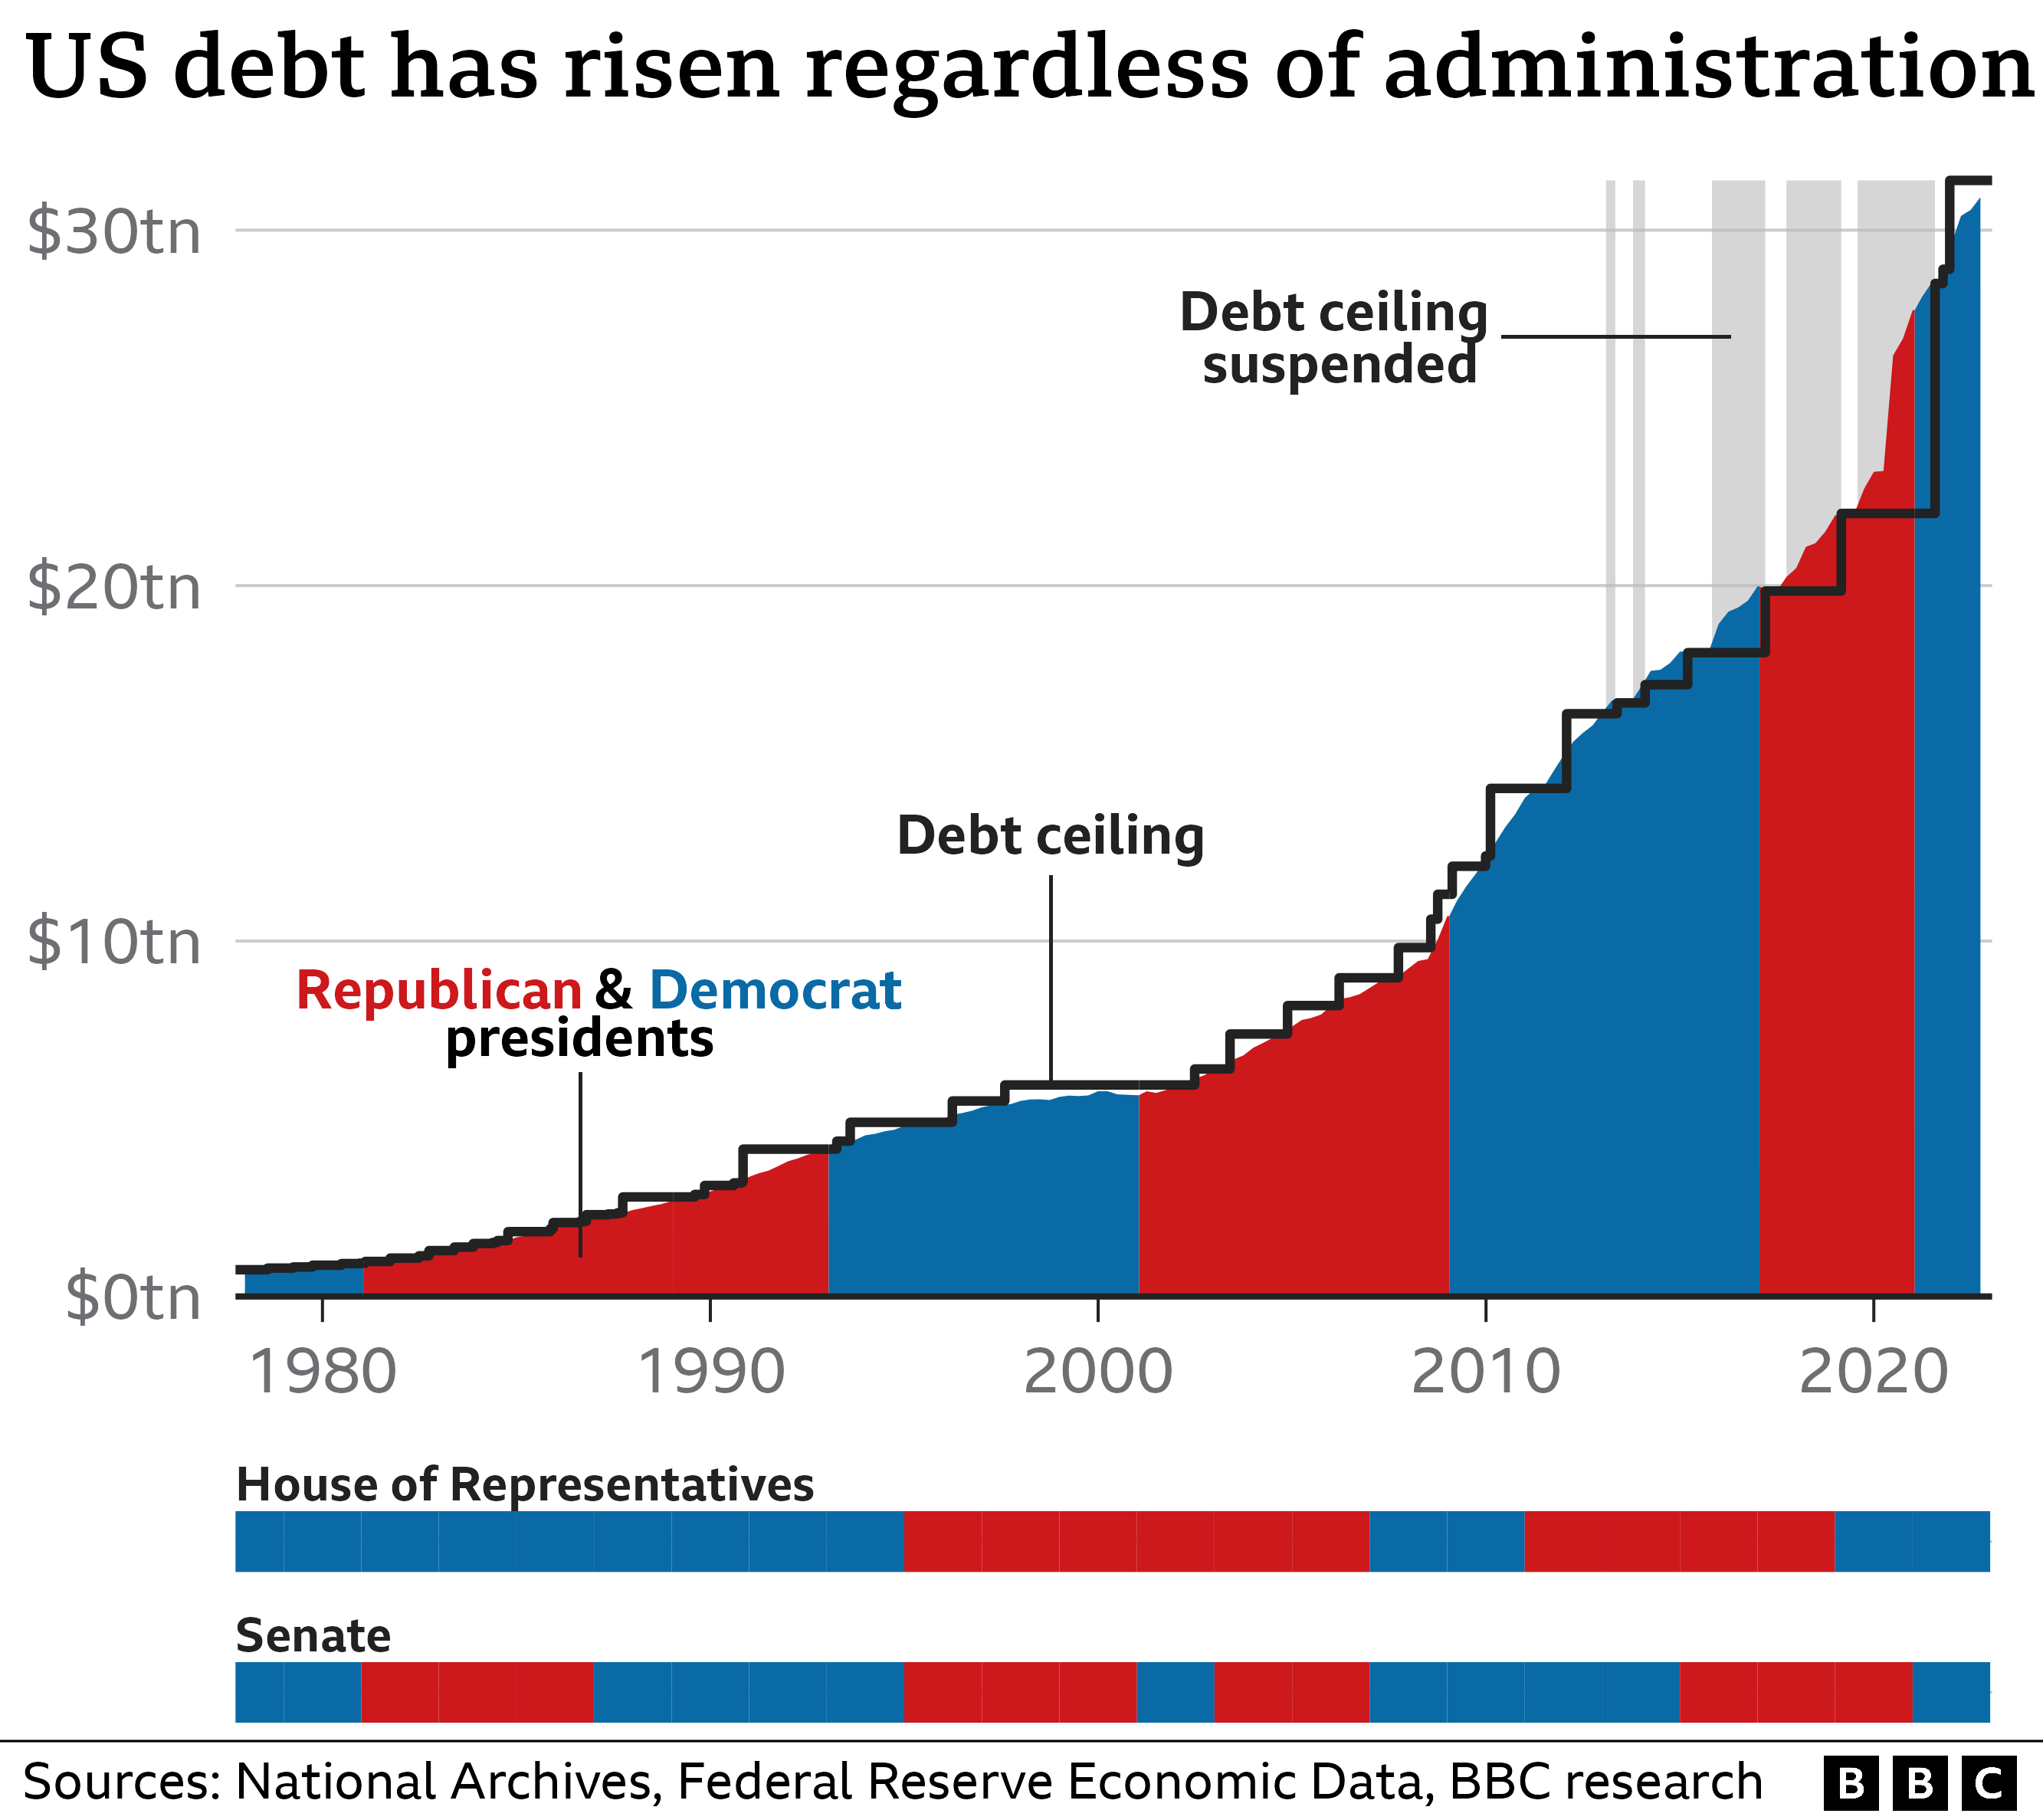 US debt by administration (source: BBC)